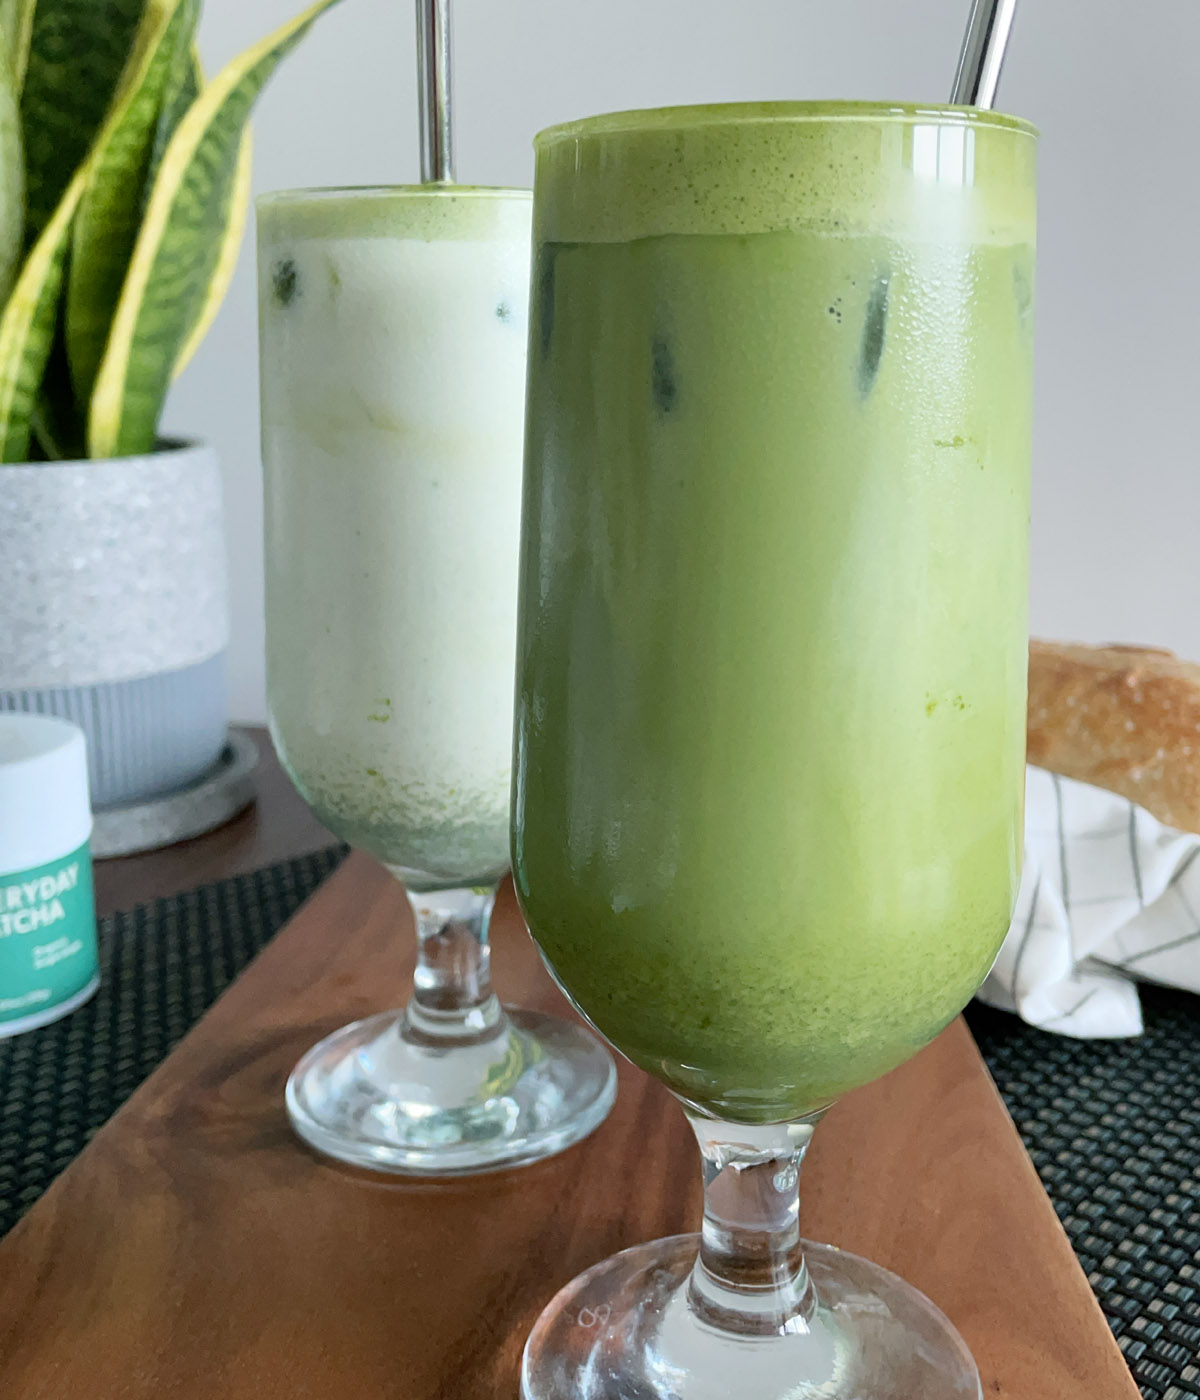 Two drinking glasses, one containing a white liquid, one containing a green liquid.